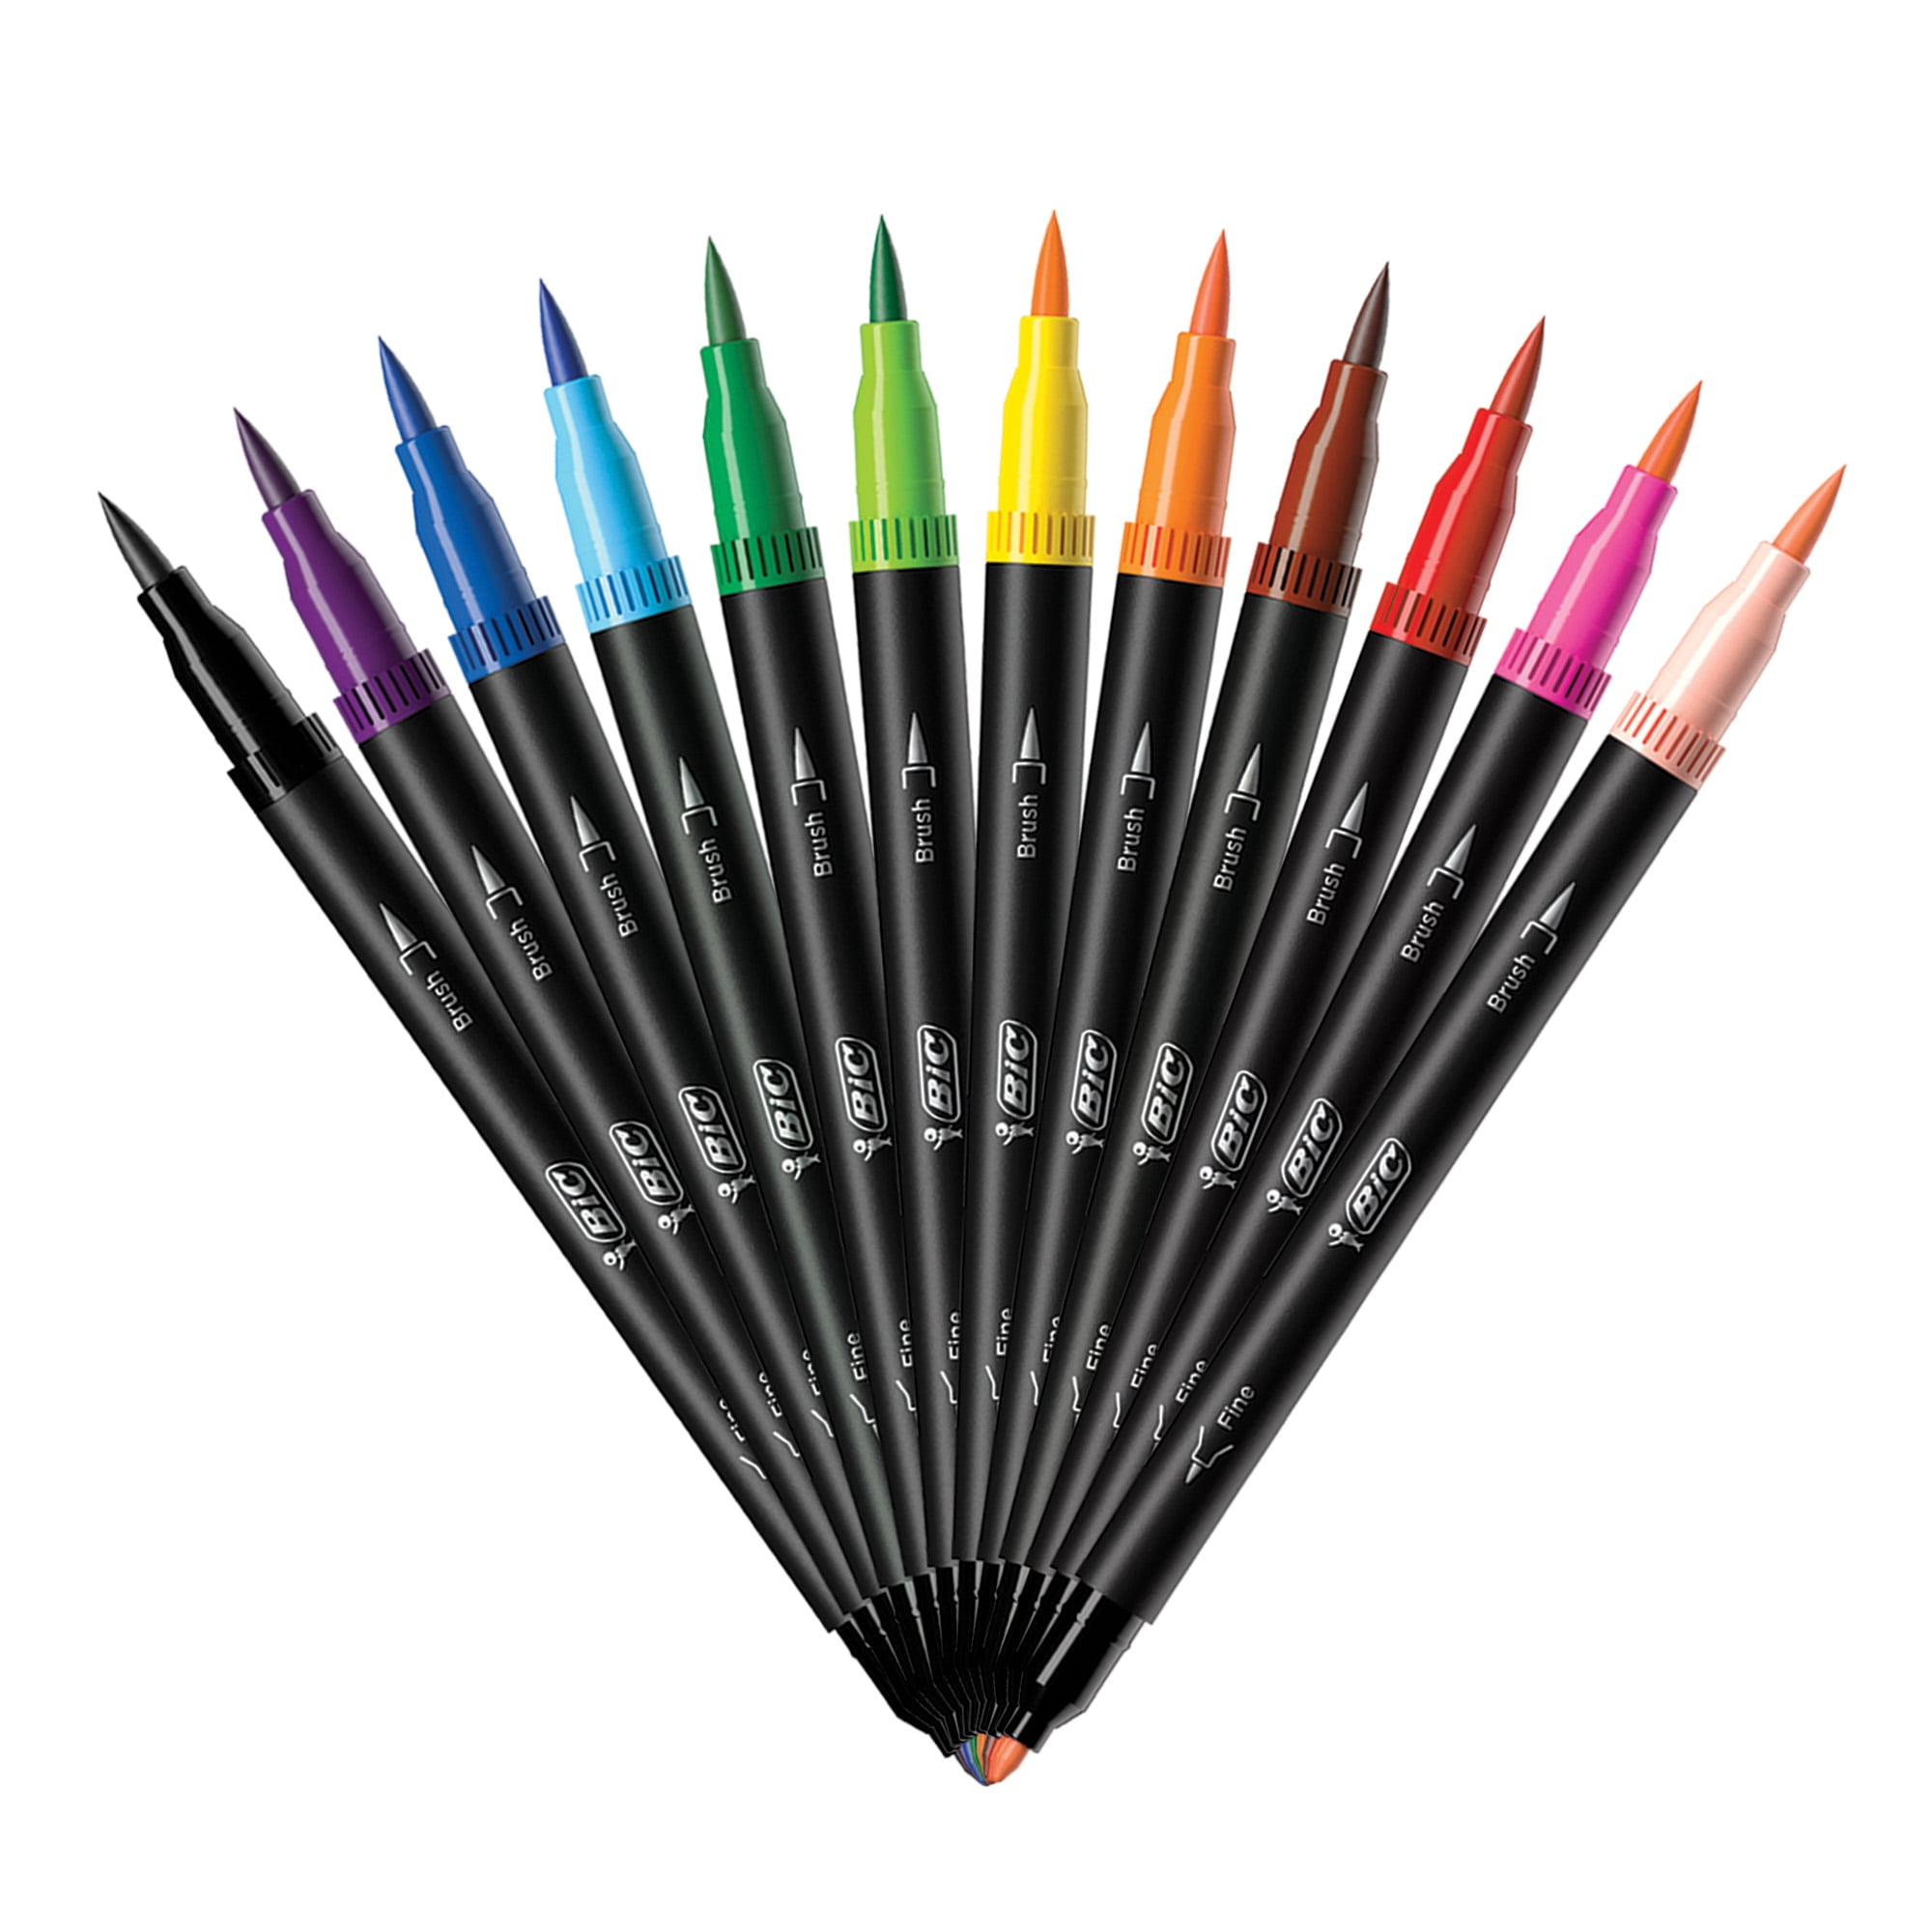  Vitoler Dual Tip Brush Markers Colored Pen,Fine Point